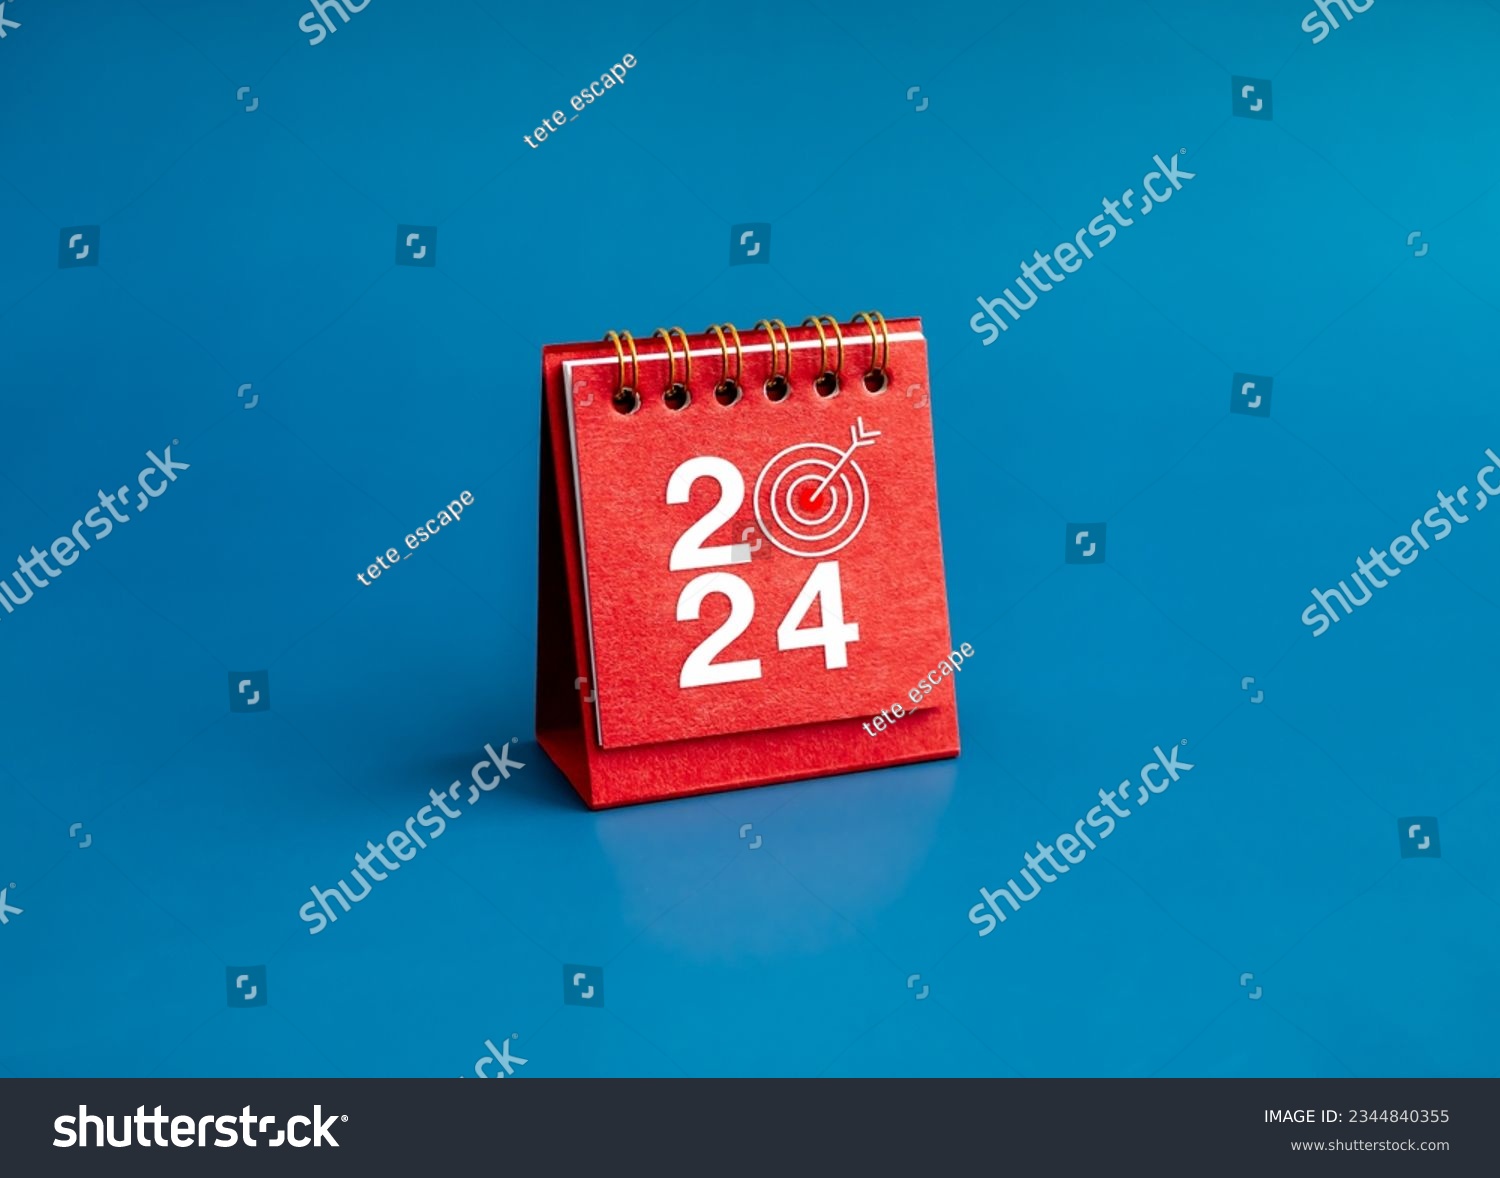 Happy new year 2024 banner background. 2024 numbers year with target dart icon on red small desk calendar cover standing on blue background, minimal style. Business goals plan and success concepts. #2344840355